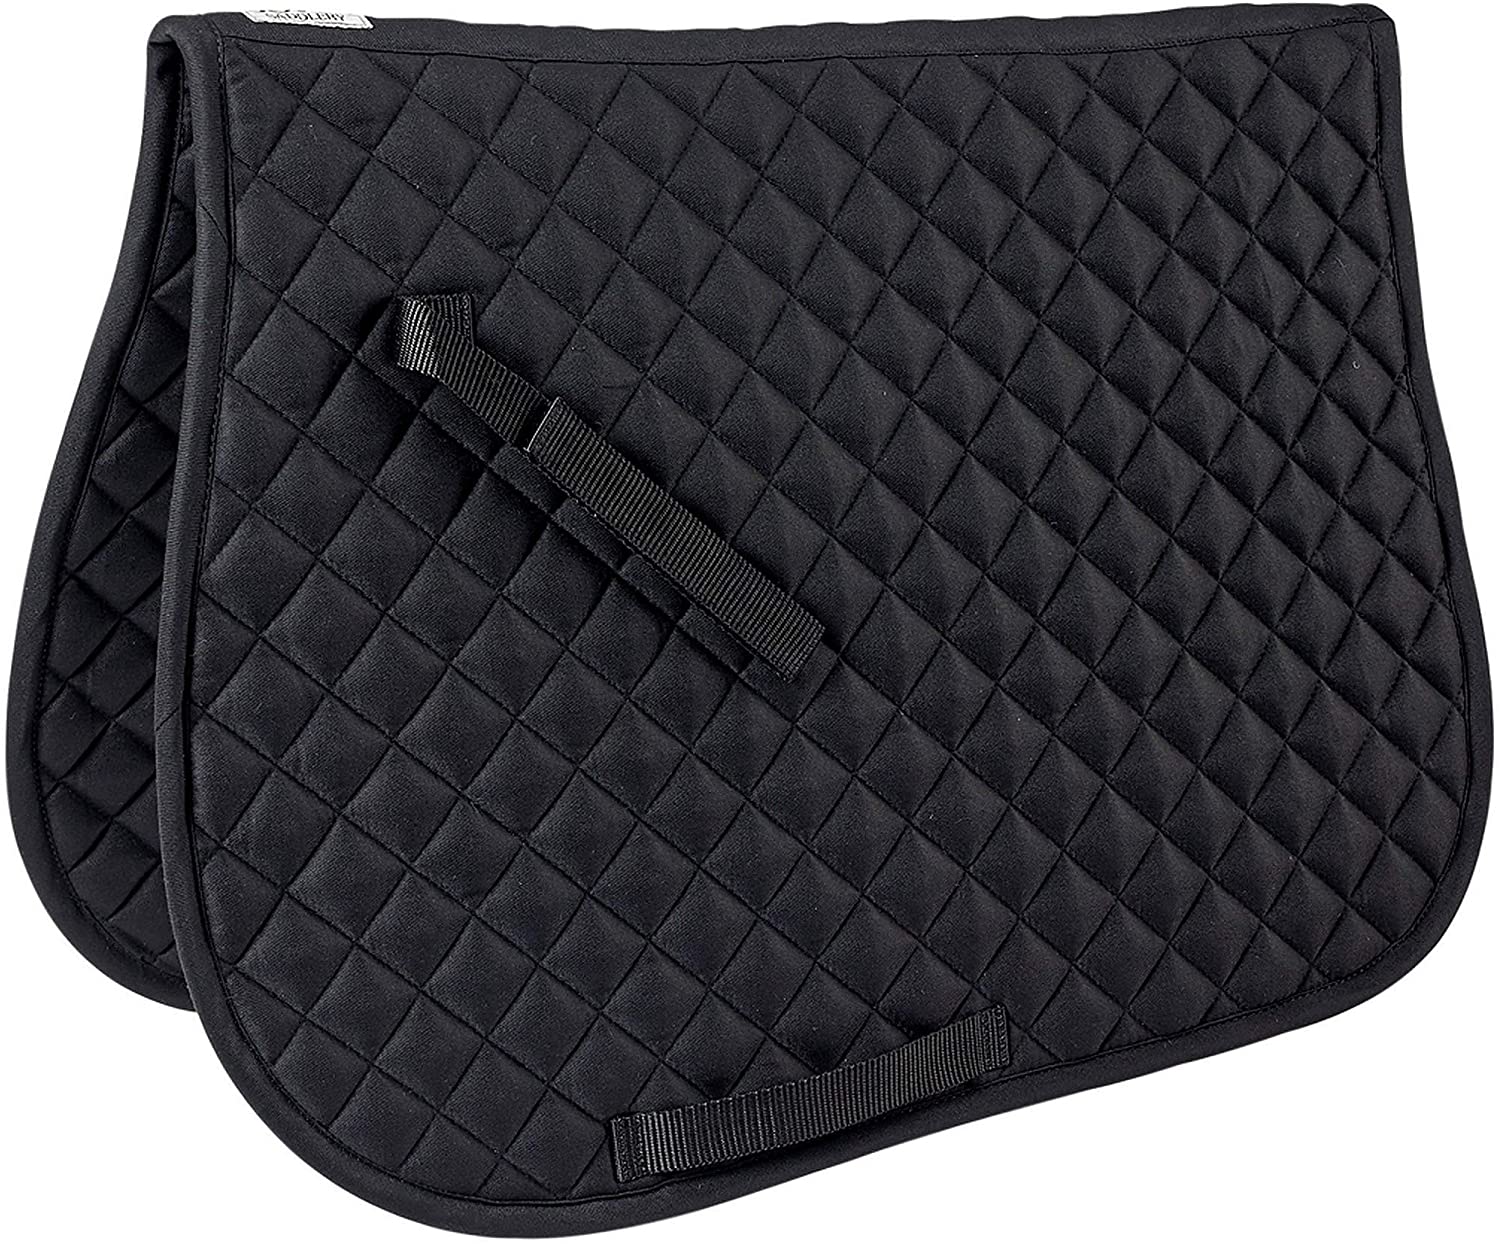 Dover Saddlery Quilted All-Purpose Saddle Pad